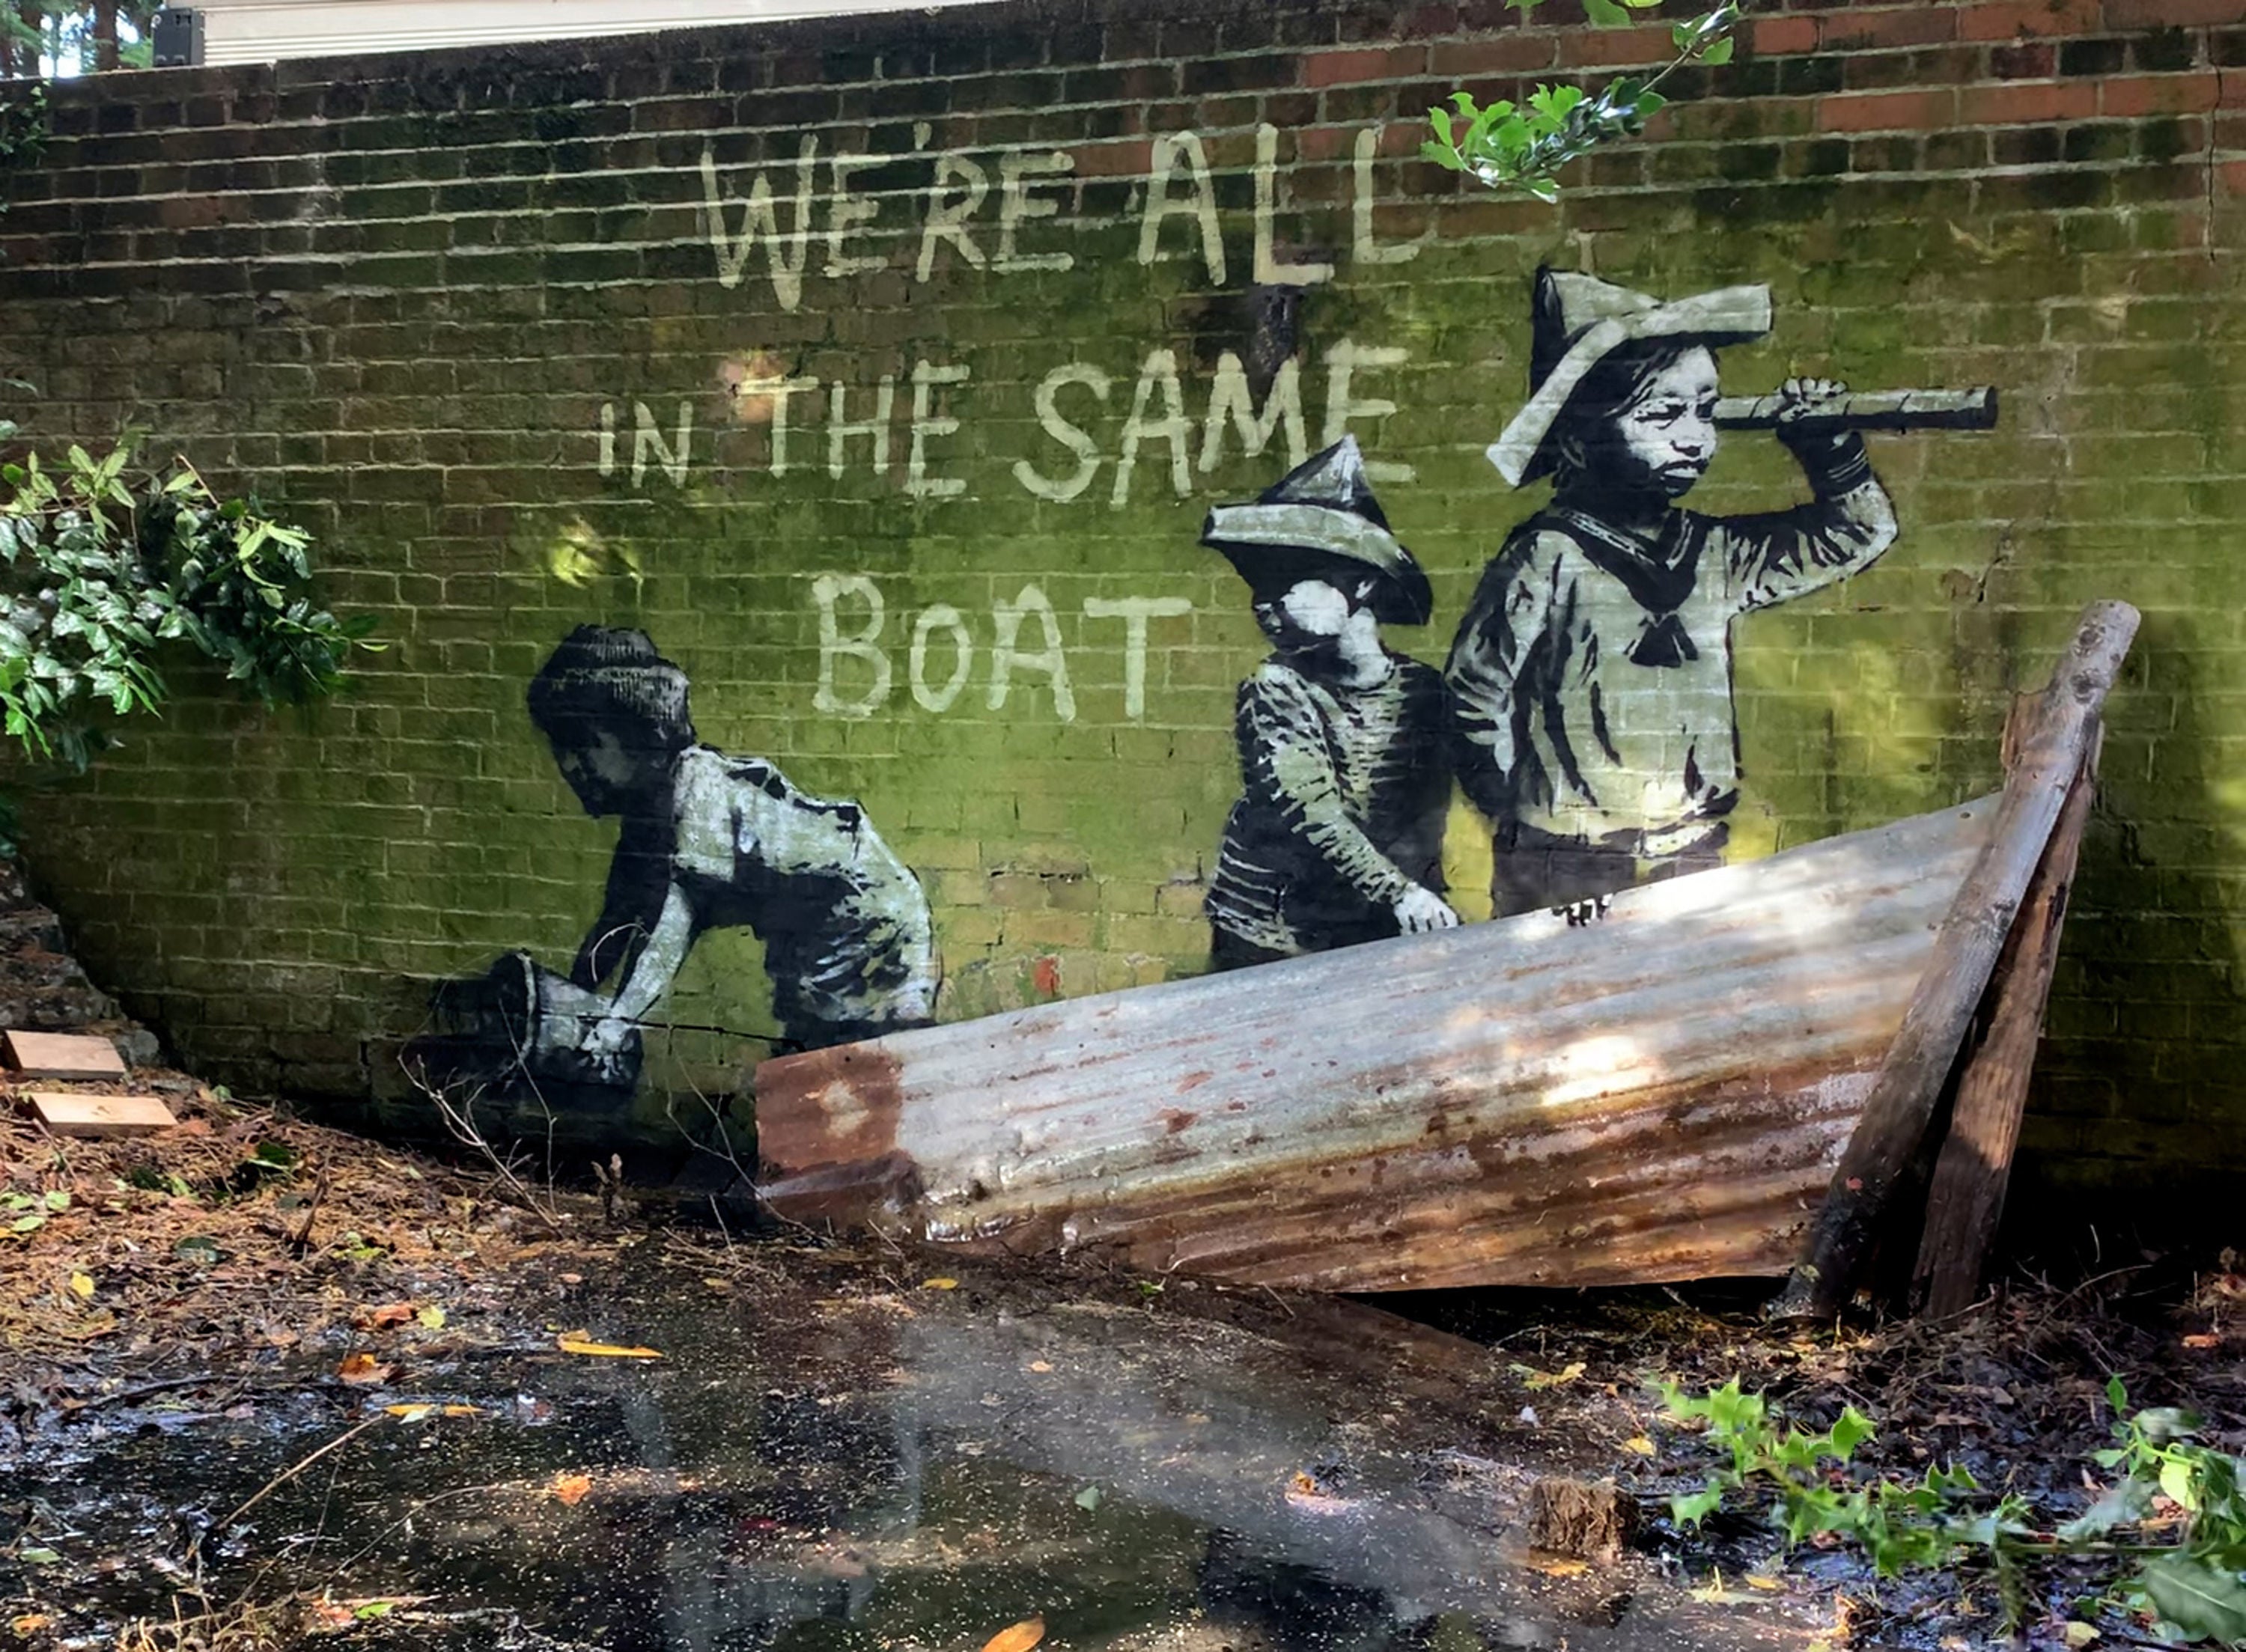 treet art which has appeared on a wall in Nicholas Everitt Park, Lowestoft, Suffolk, which is believed to be a new work by street artist Banksy.